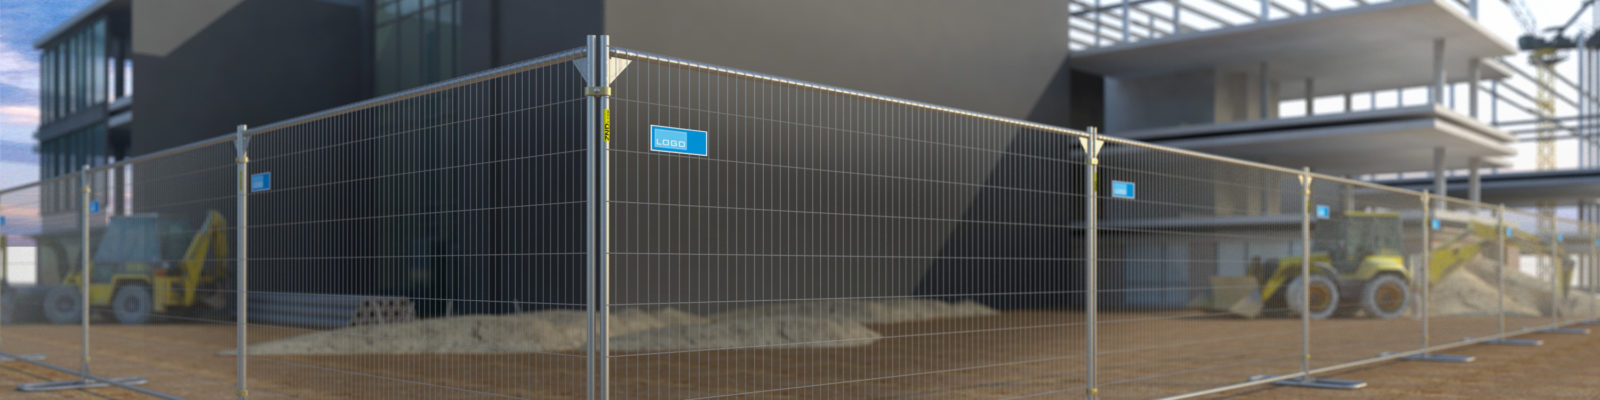 Installation of temporary fence panels at a construction site